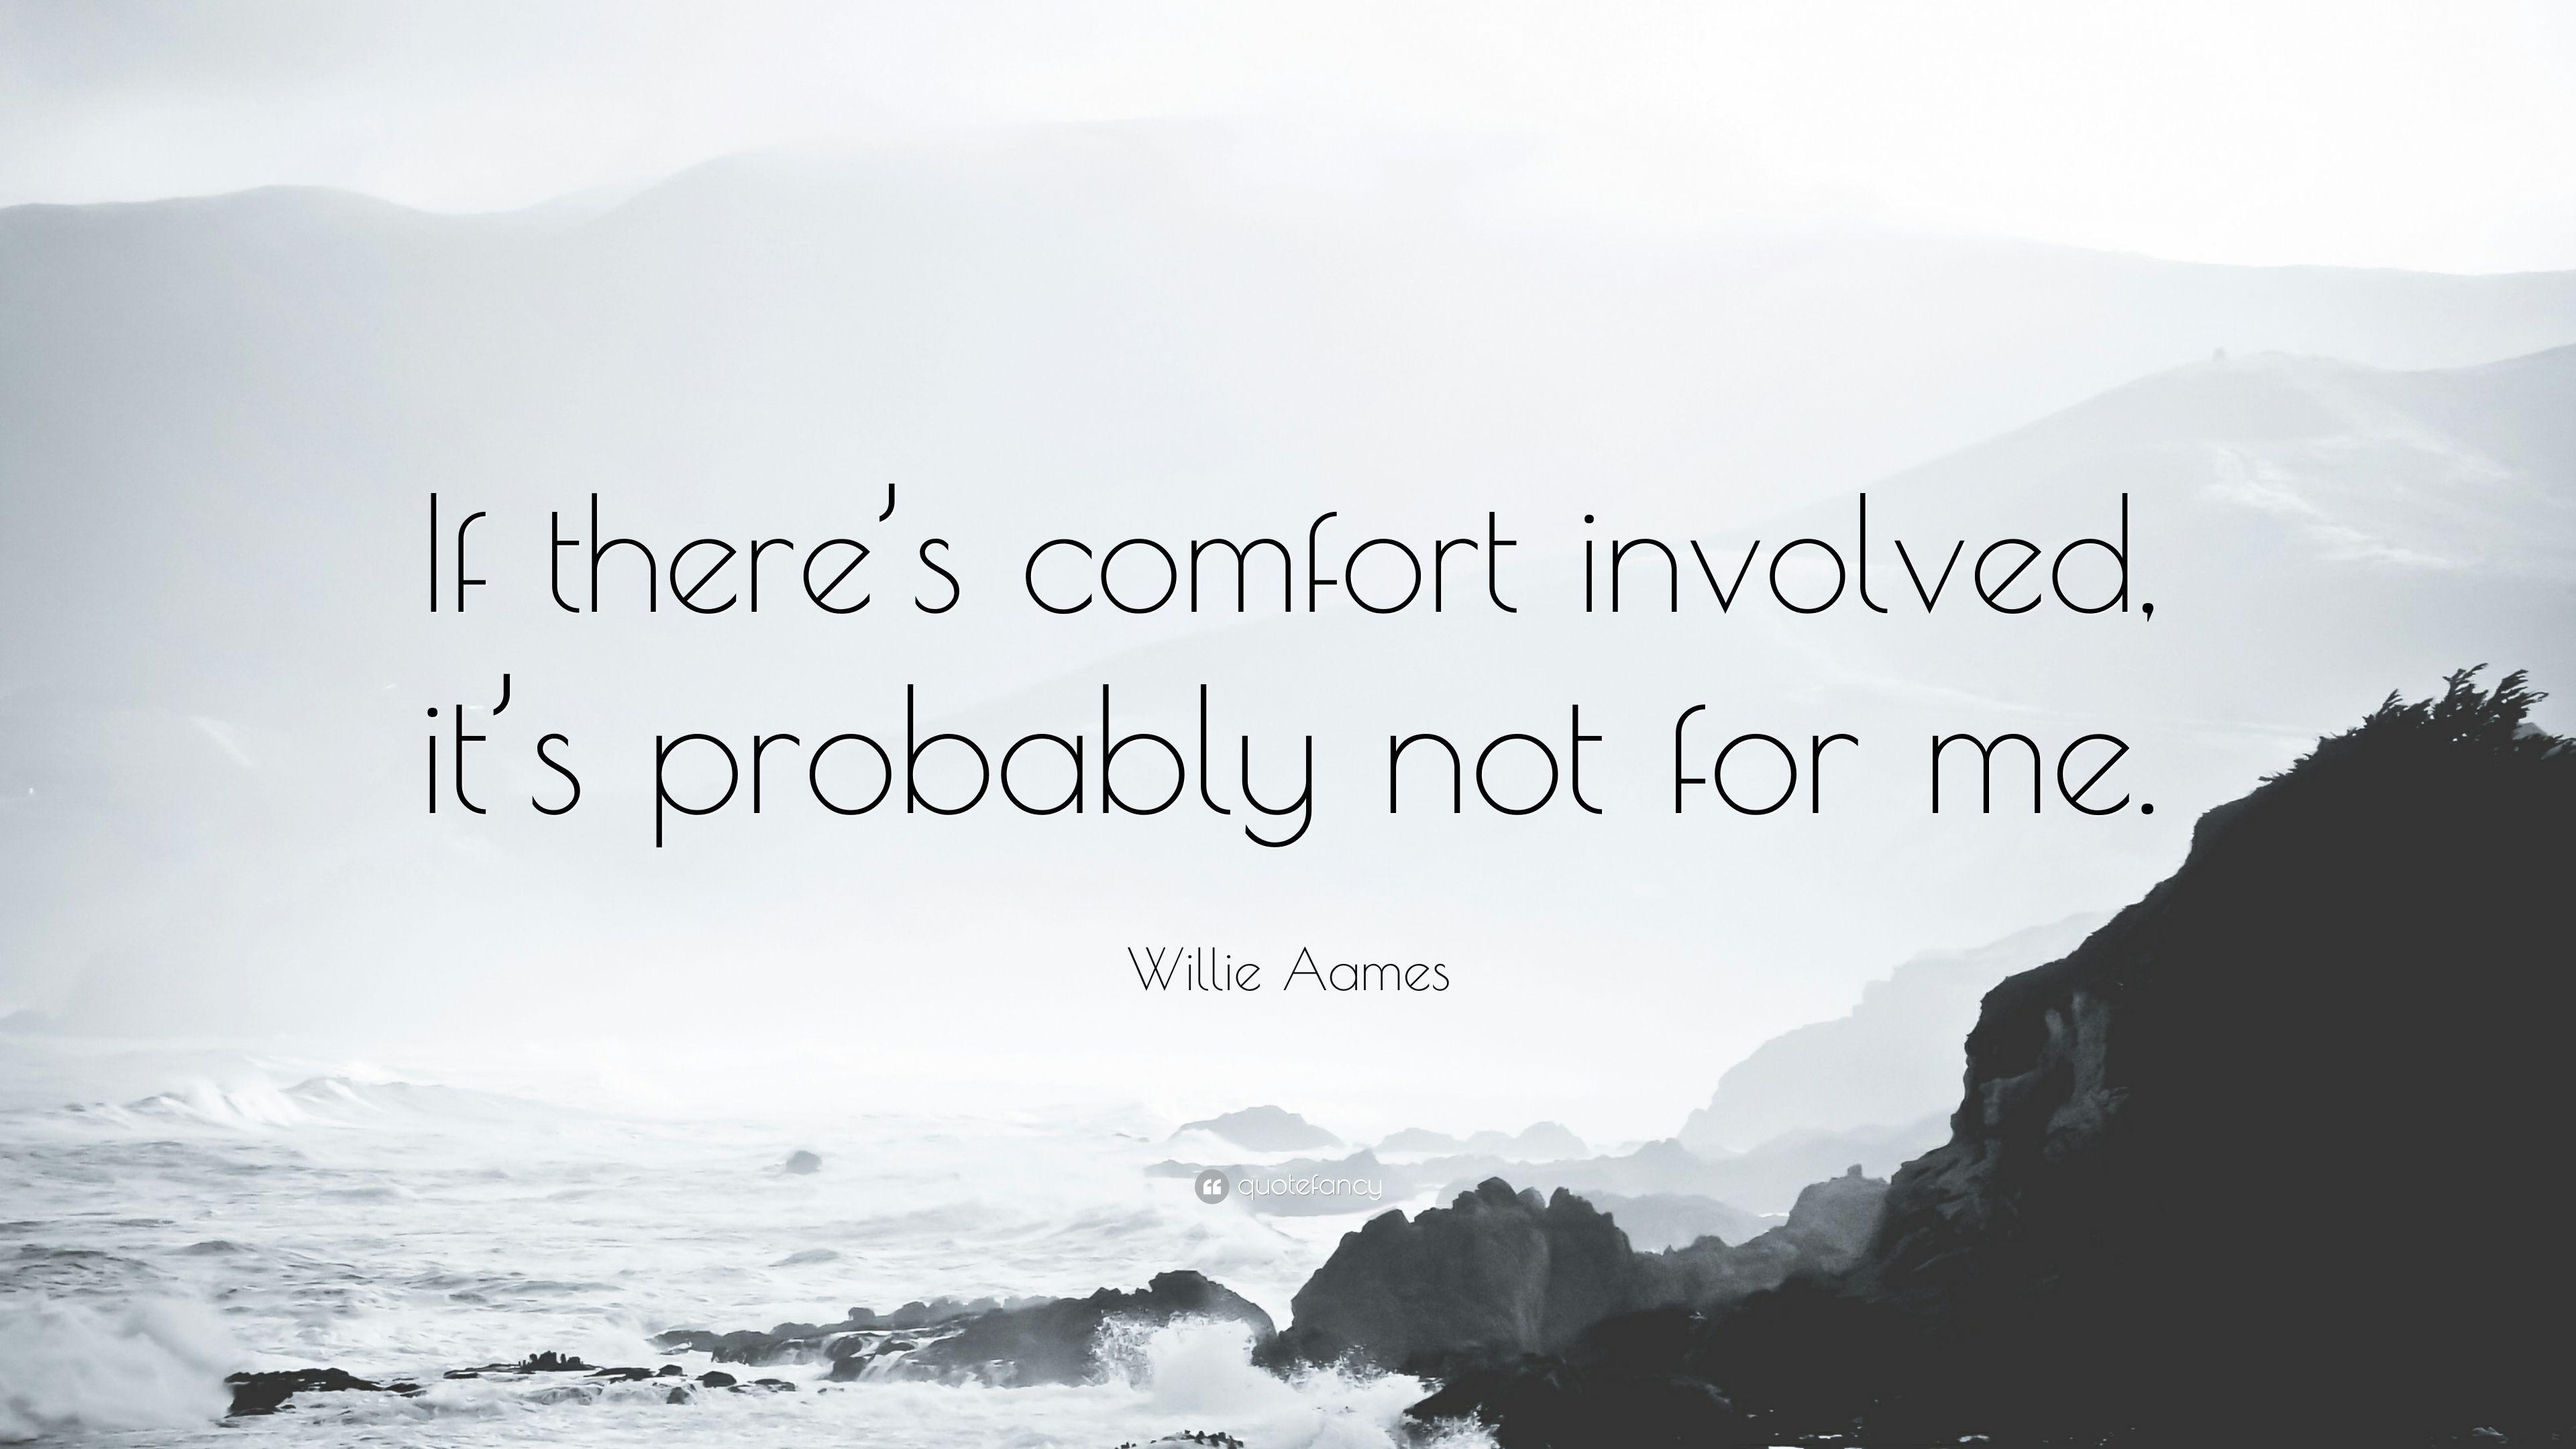 Willie Aames Quote: “If there's comfort involved, it's probably not